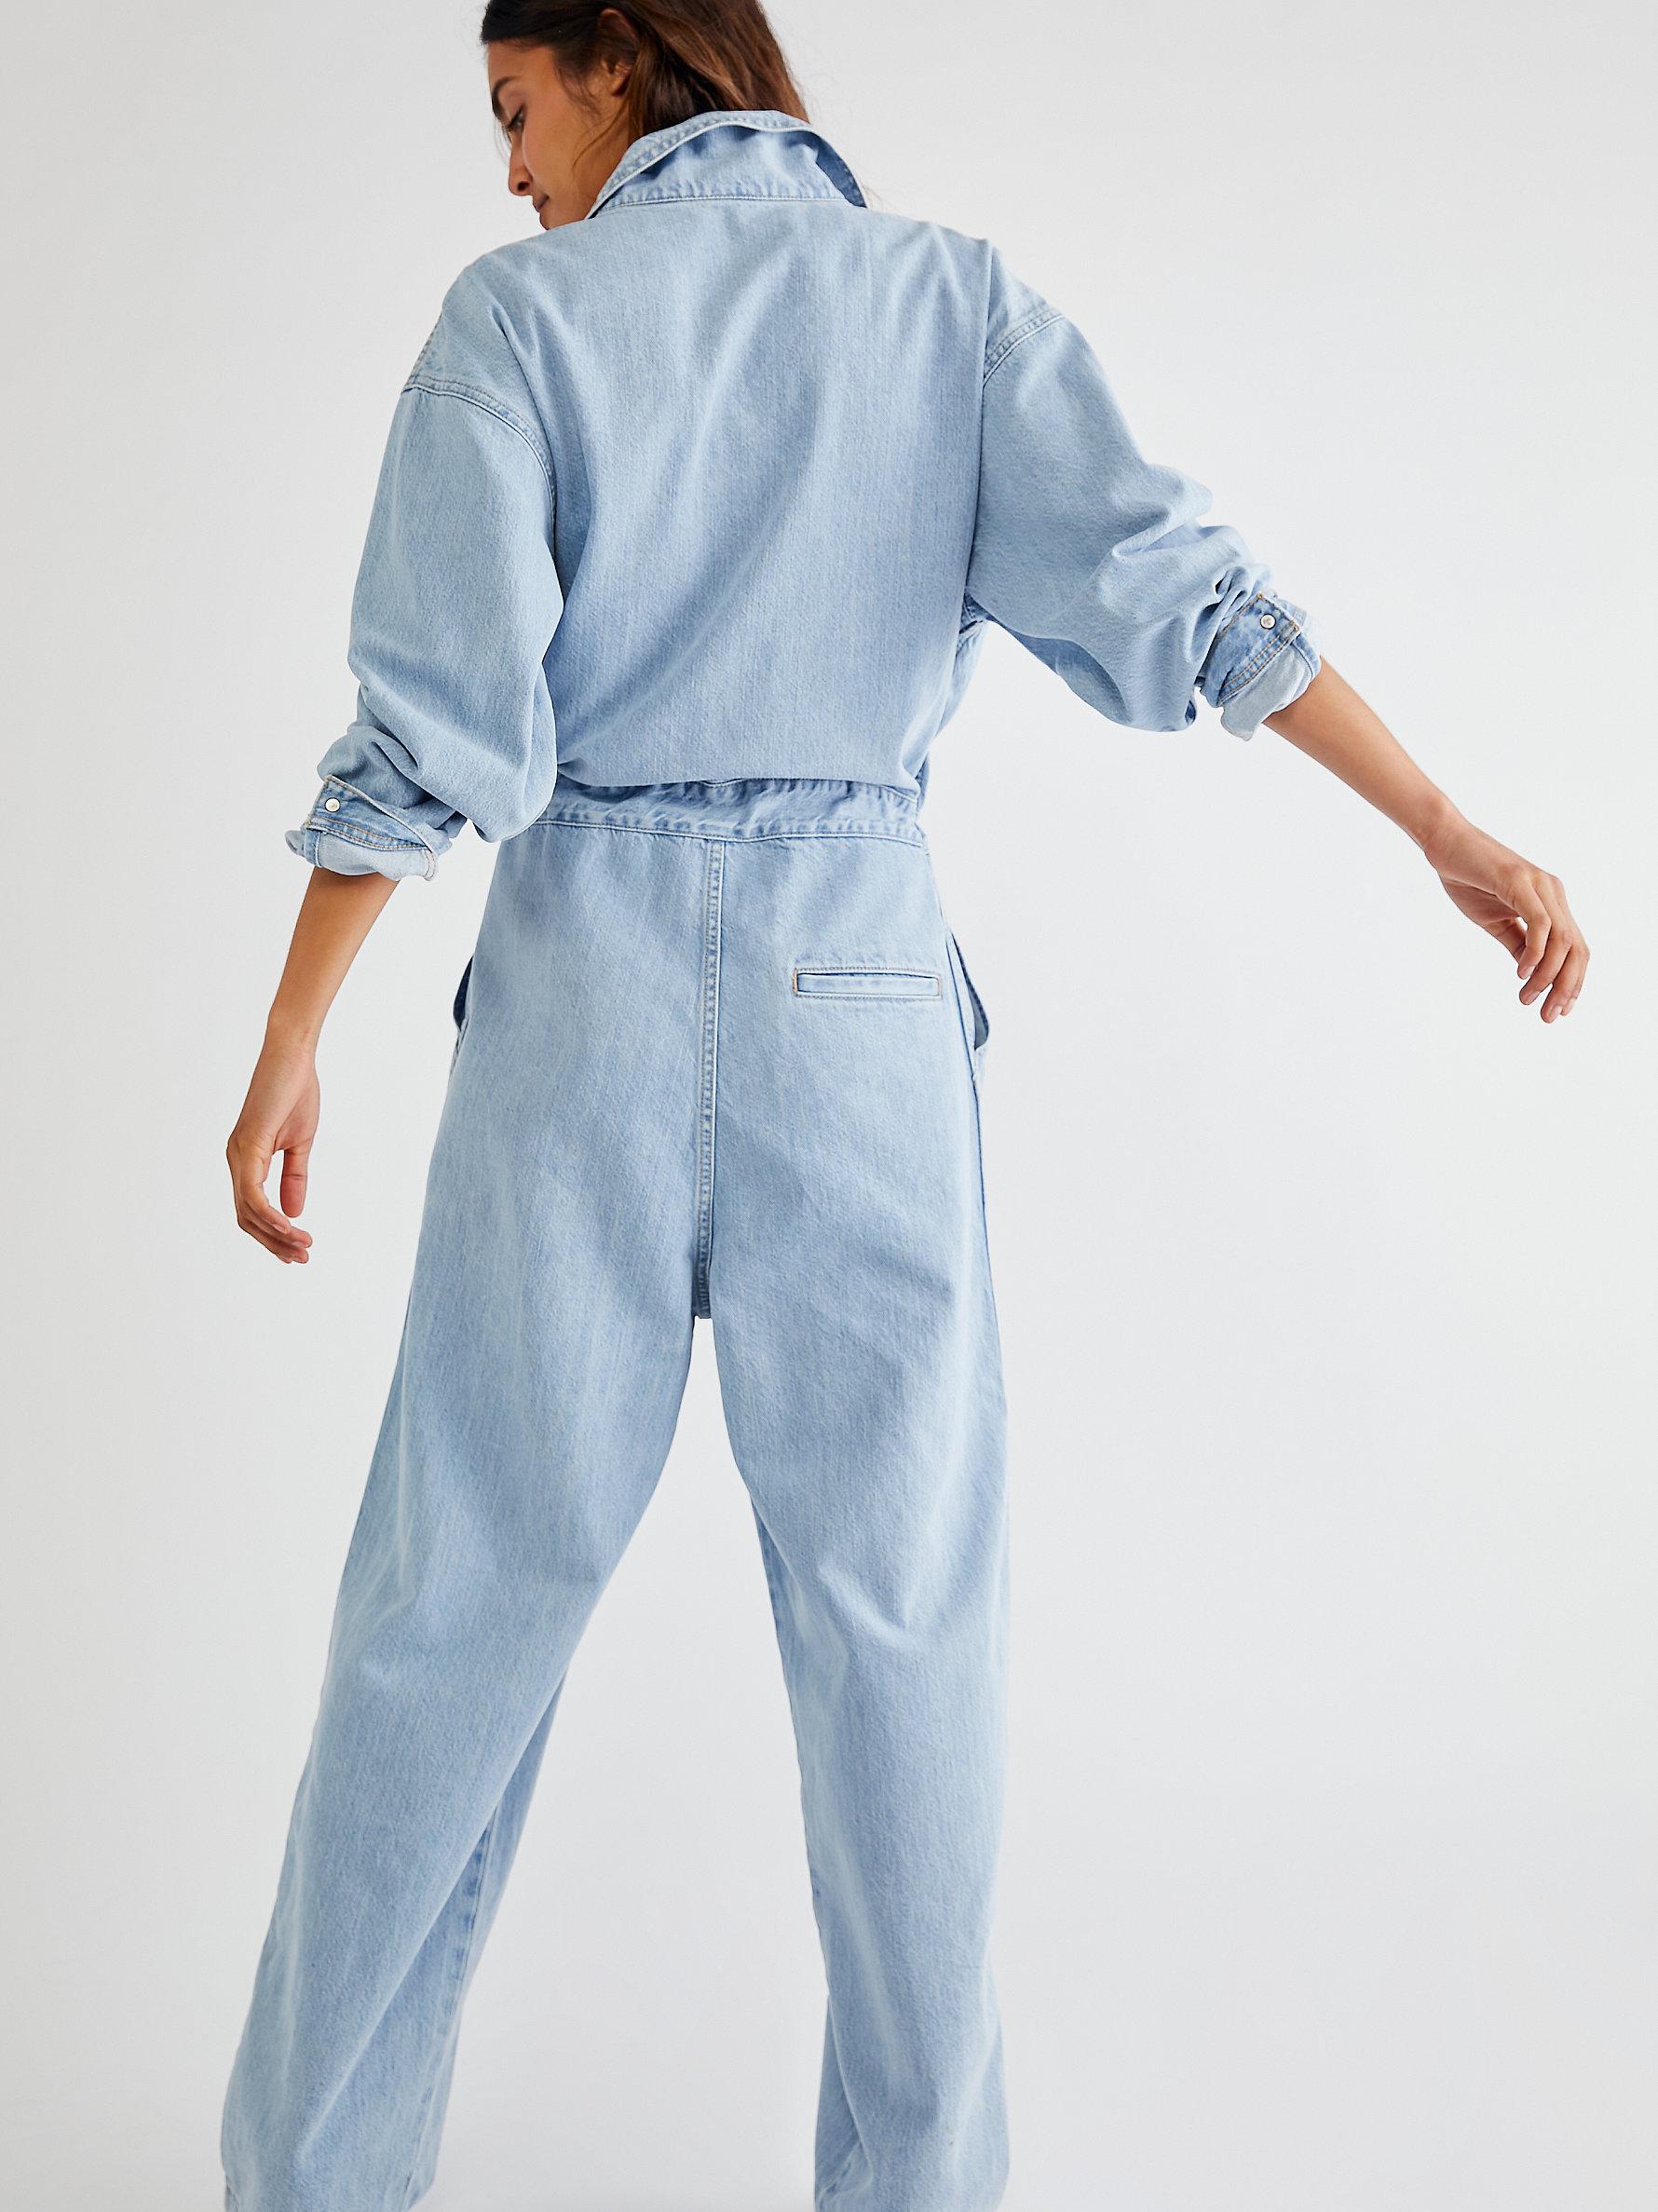 Free People Levi's Roomy Jumpsuit in Blue | Lyst